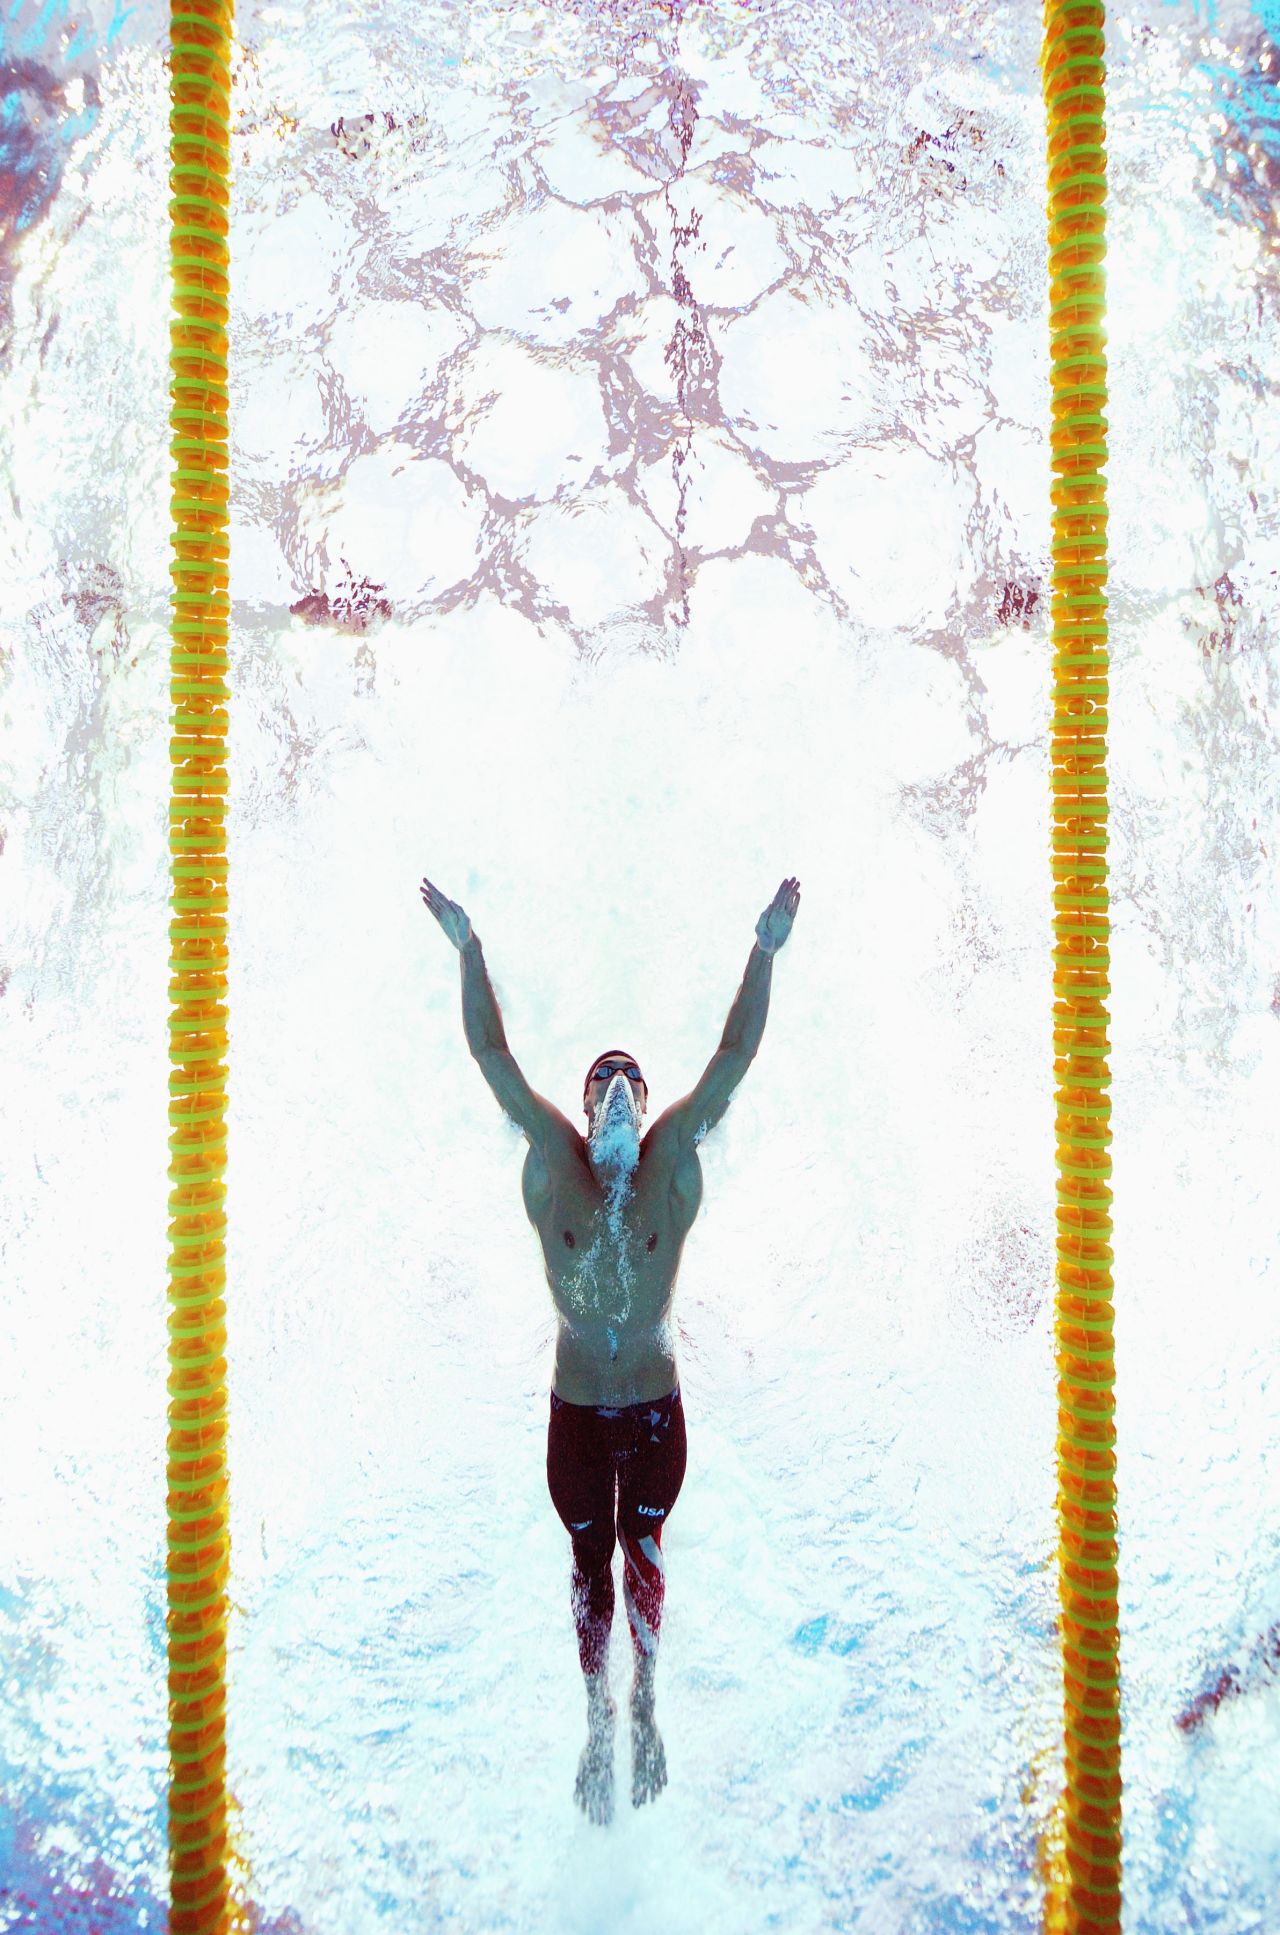 Phelps sets a world record in the 200-meter butterfly in Beijing.